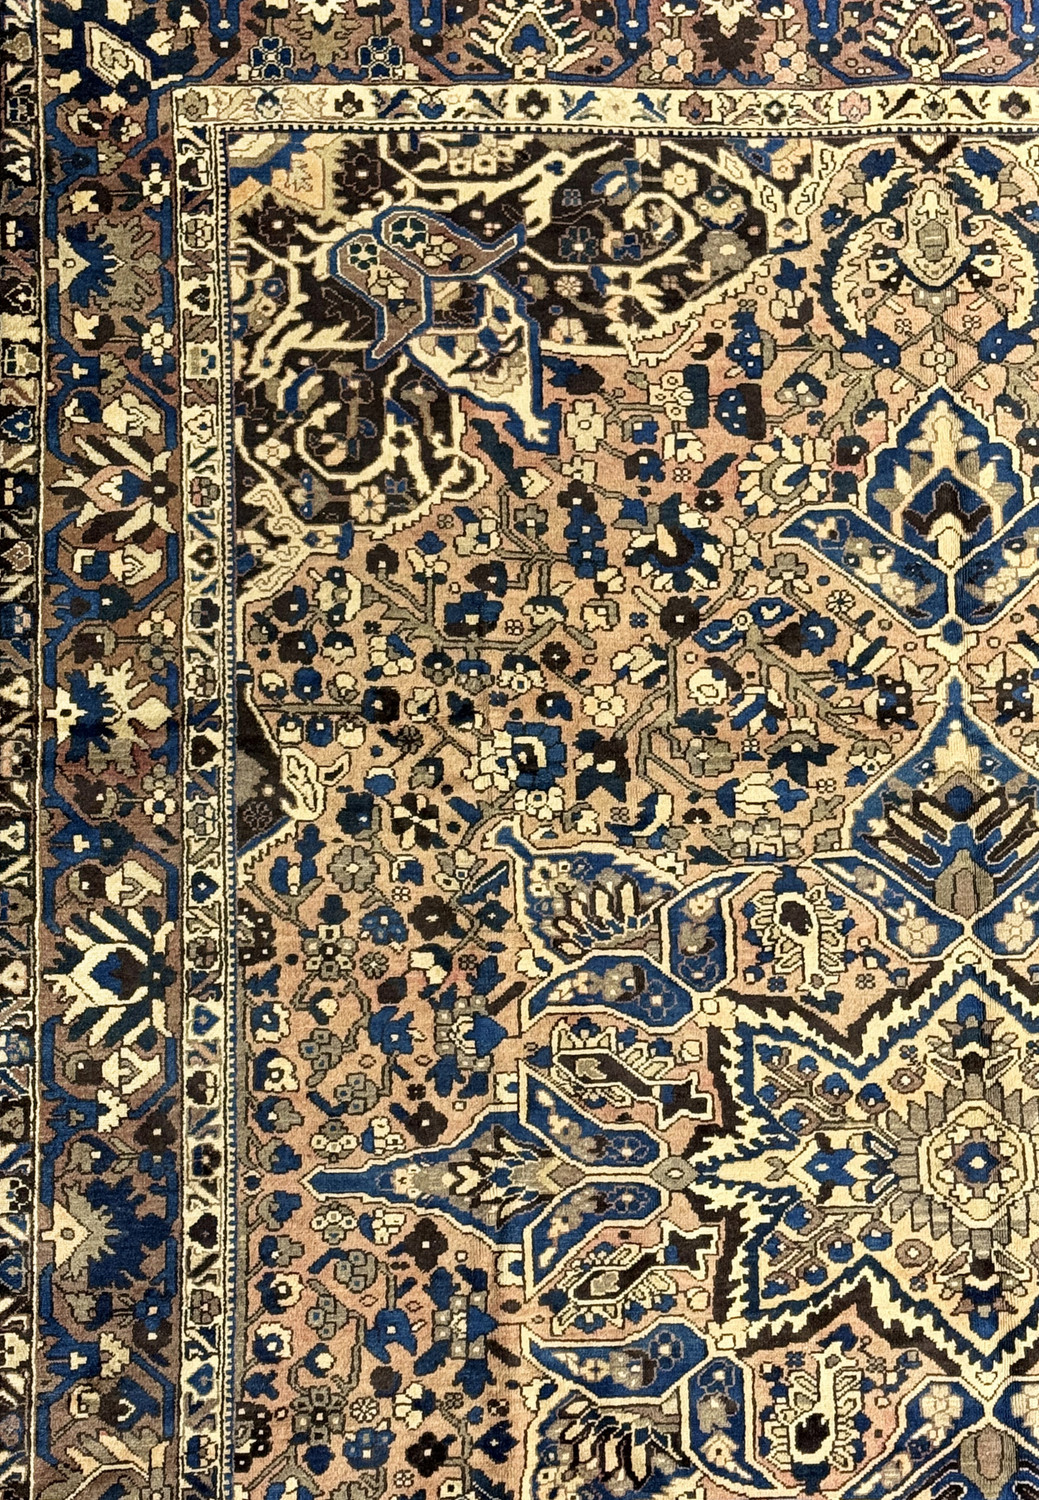 Close-up of the central medallion and surrounding patterns on a Vintage Bakhtiar Rug.